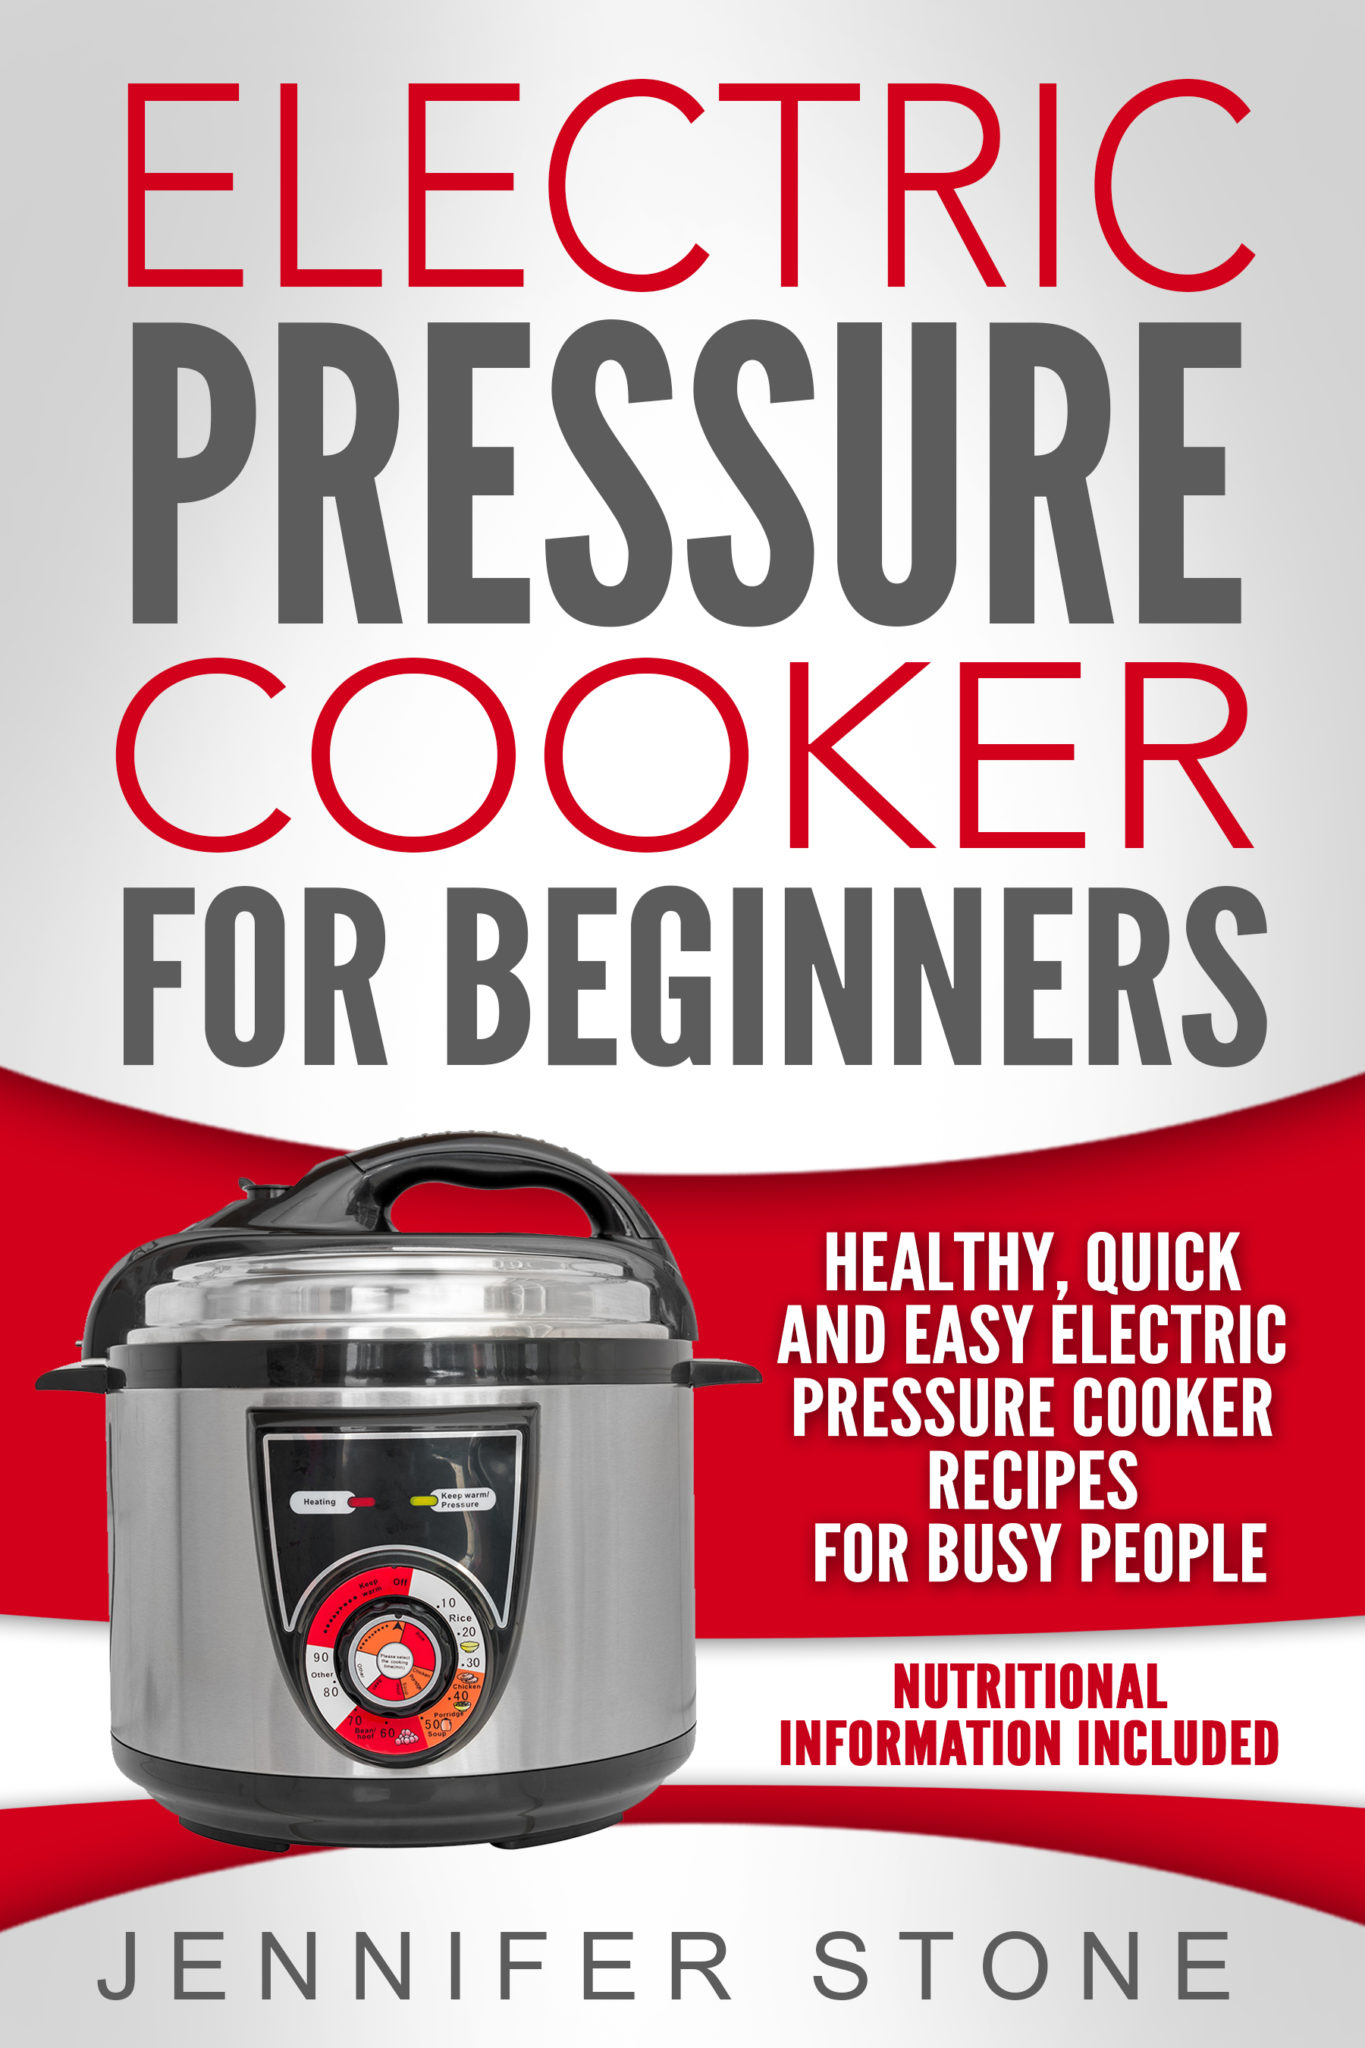 FREE: Electric Pressure Cooker For Beginners: Healthy, Quick and Easy Electric Pressure Cooker Recipes for Busy People by Jennifer Stone